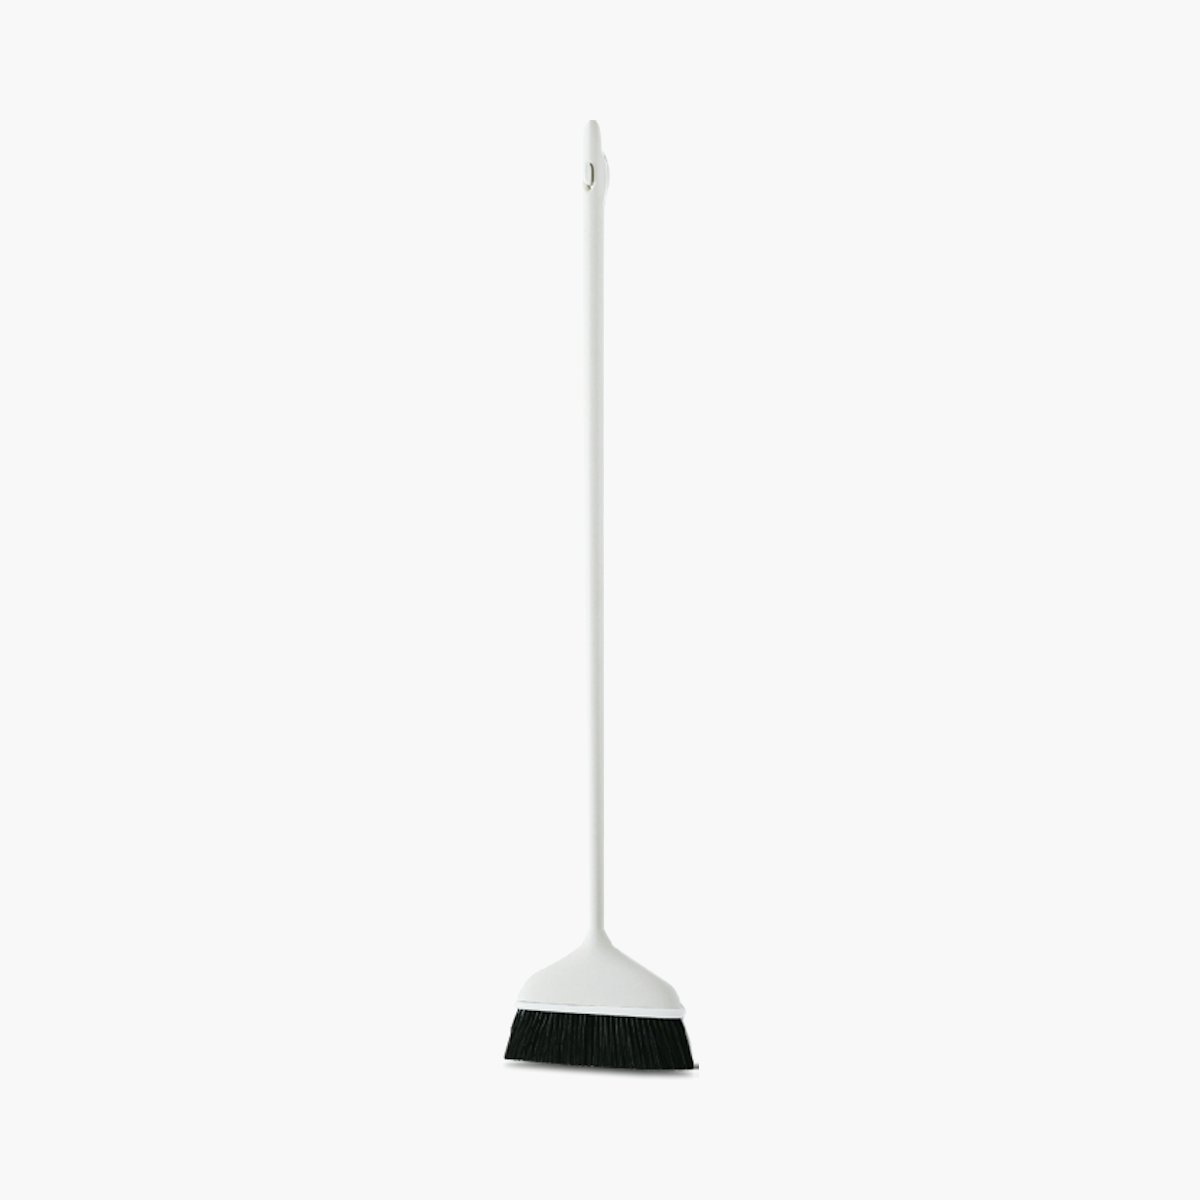 Magis Mago Broom and Wall Hook Outlet